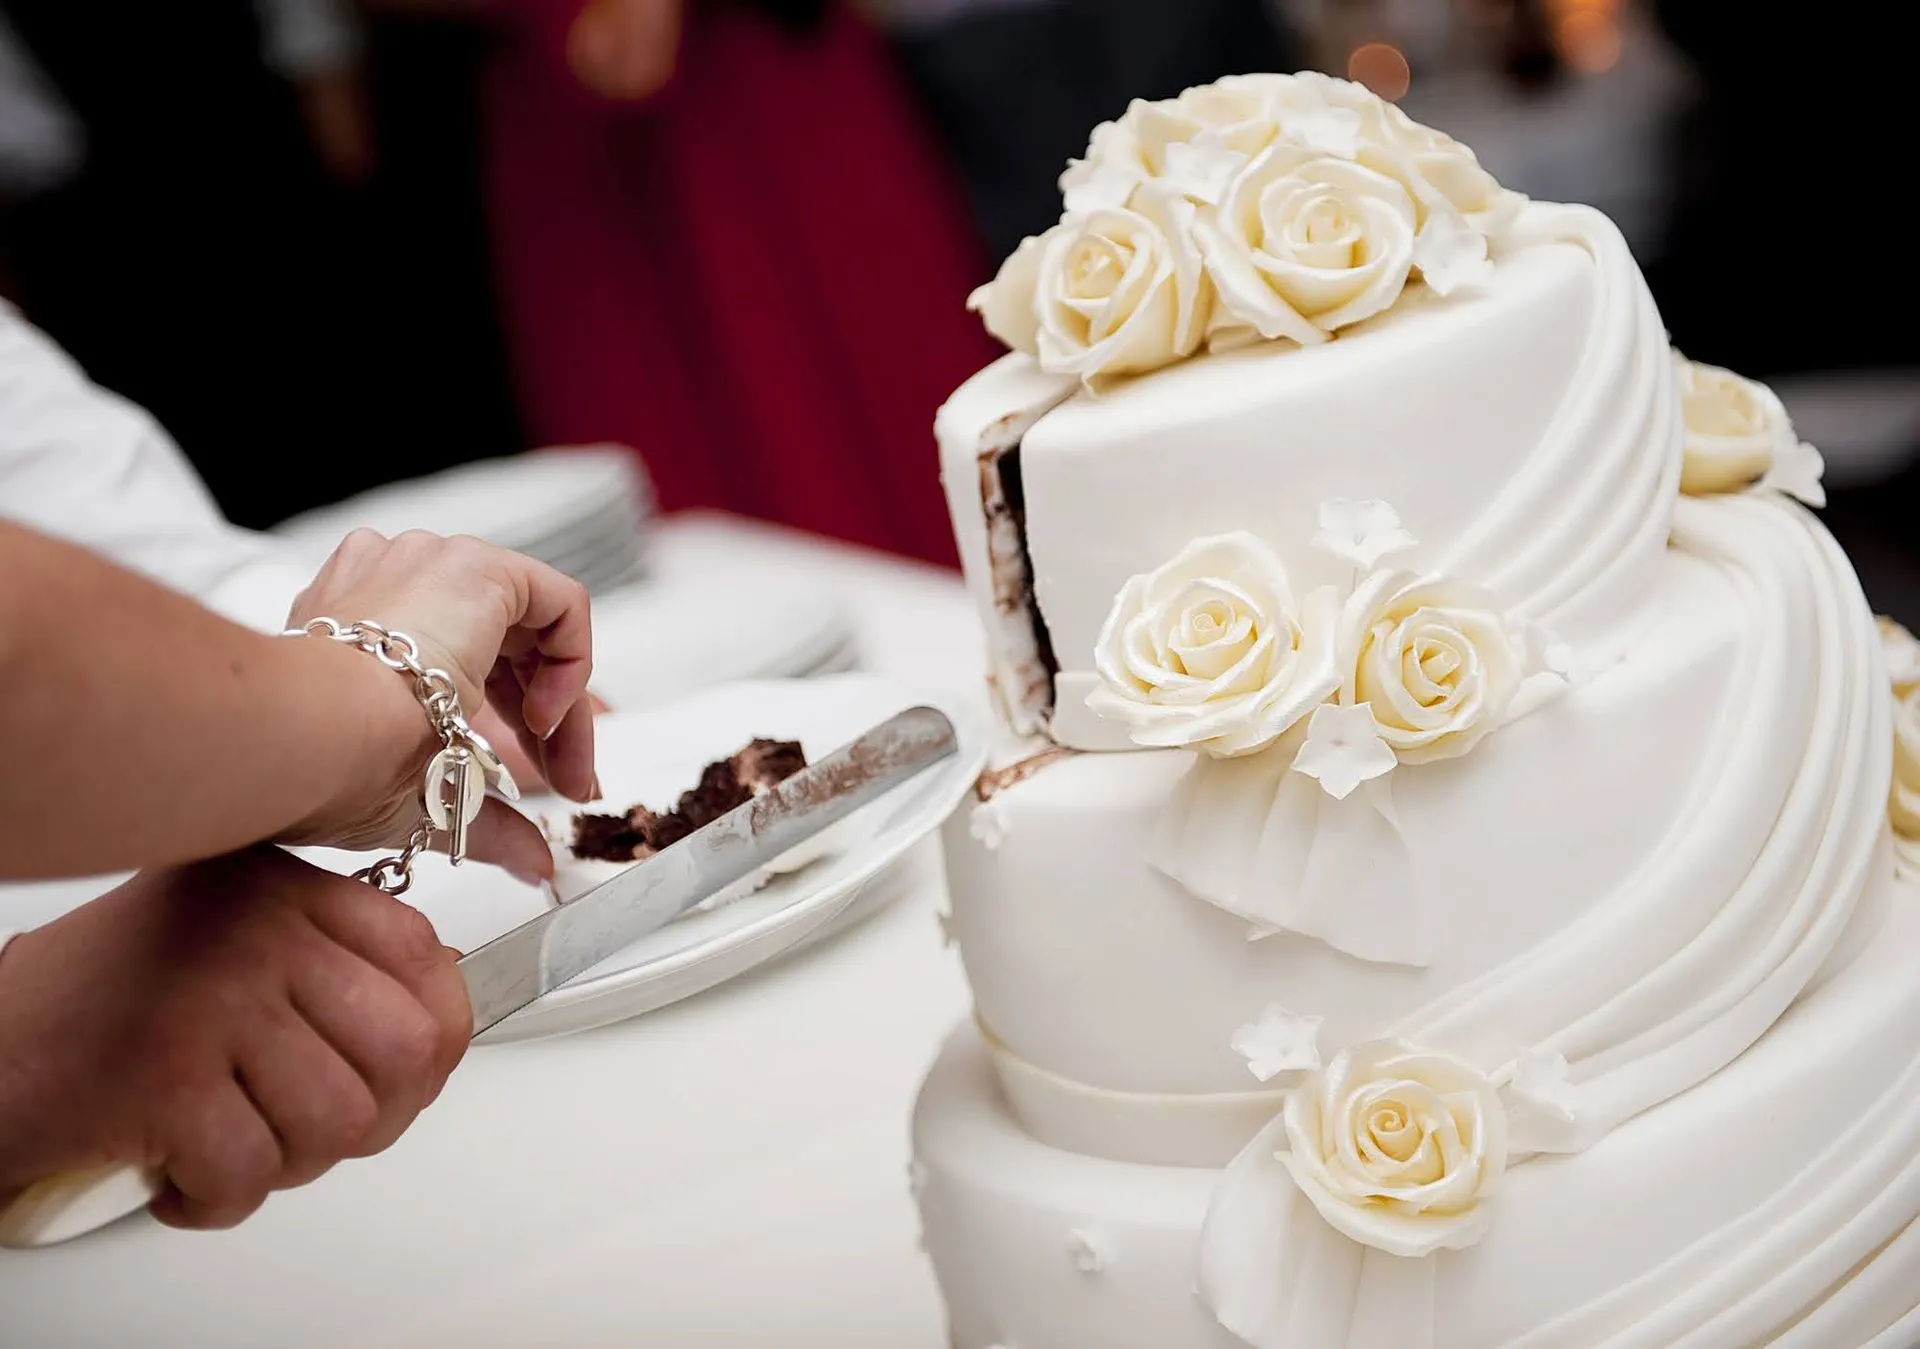 How To Choose the Perfect Wedding Cake